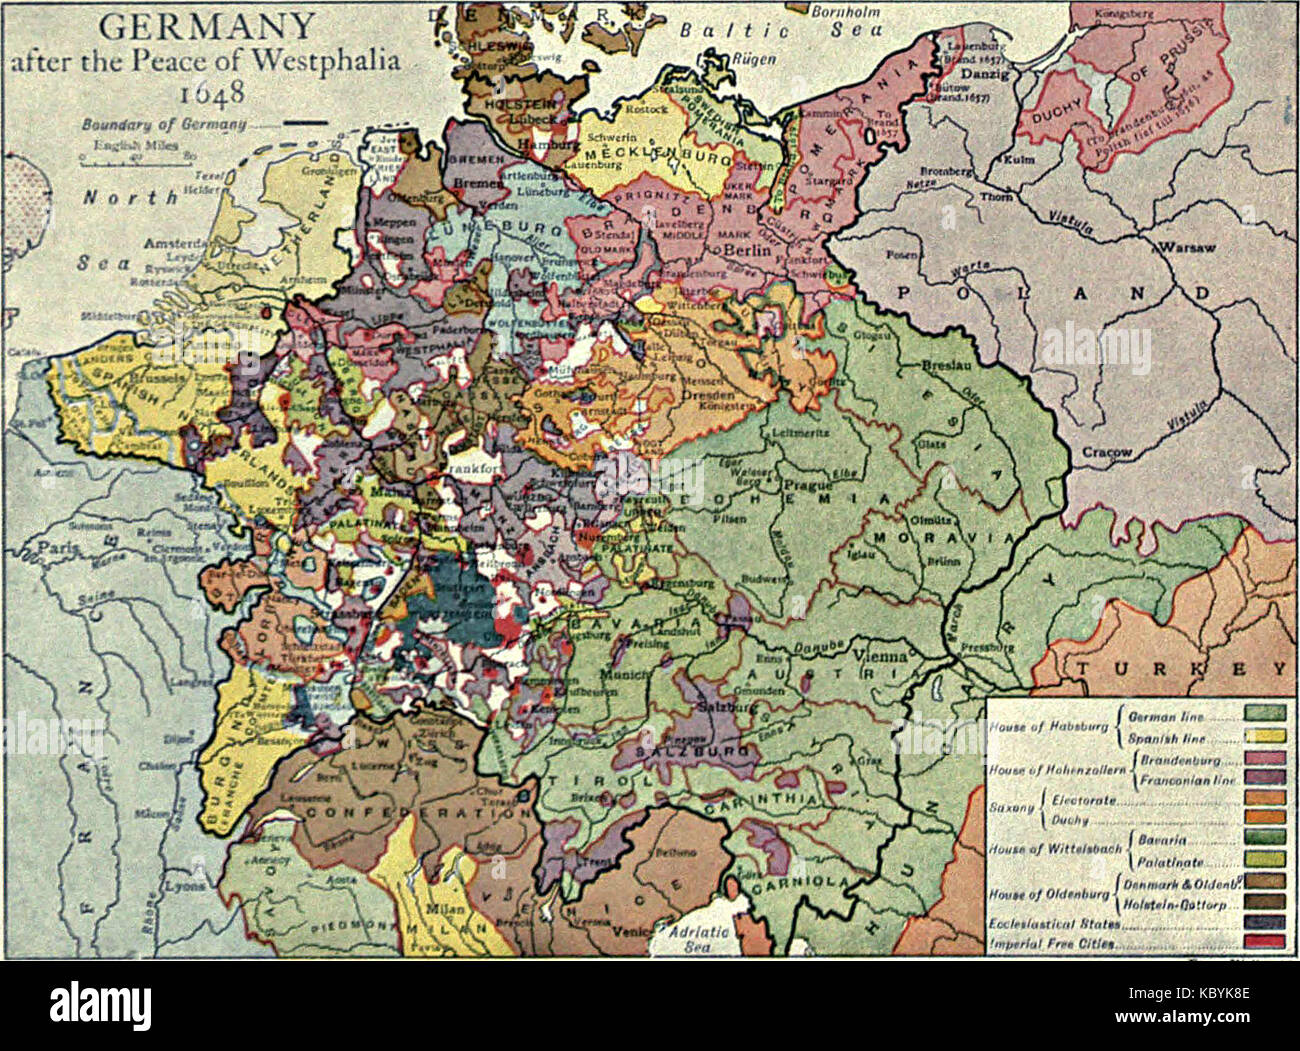 EB1911 Germany   after the Peace of Westphalia, 1648 Stock Photo